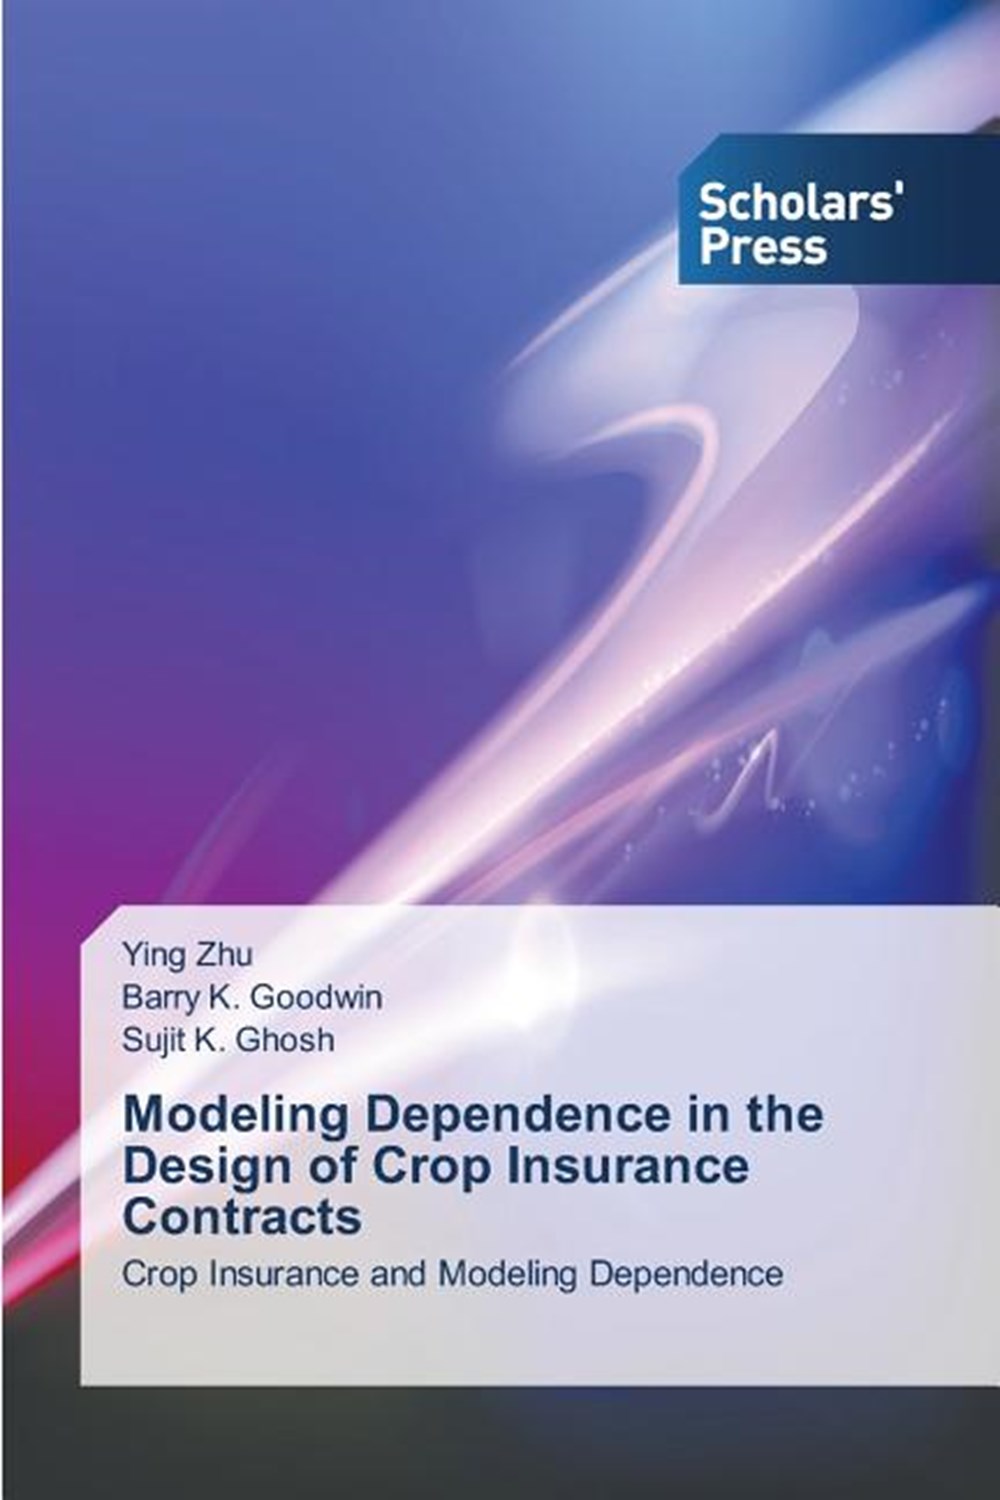 Modeling Dependence in the Design of Crop Insurance Contracts